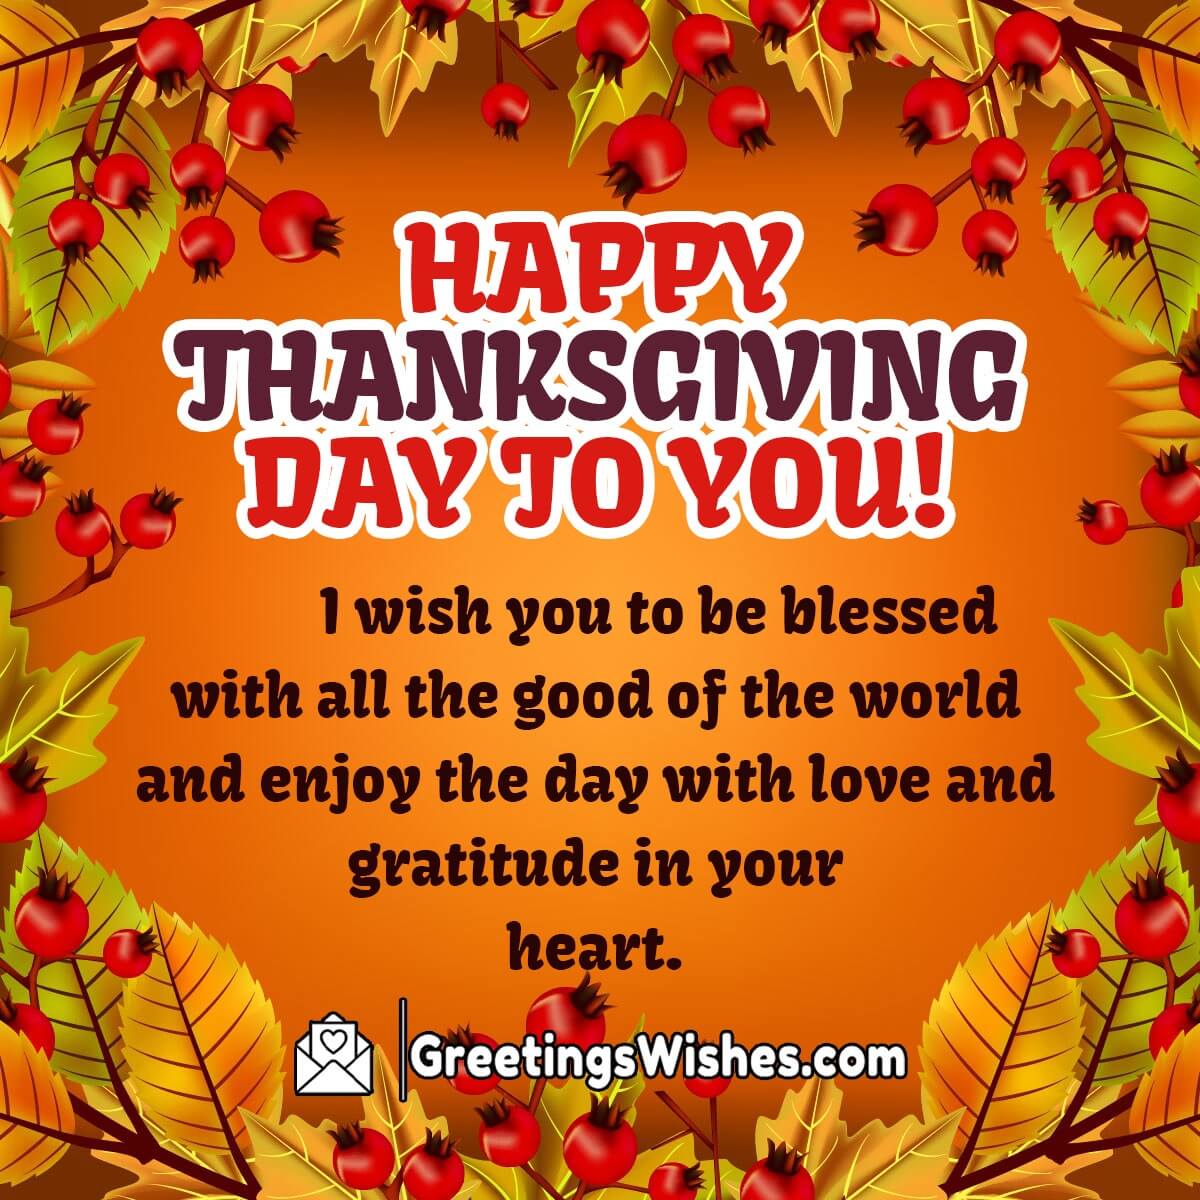 Thanksgiving Day Wishes, Messages (24th November) Greetings Wishes